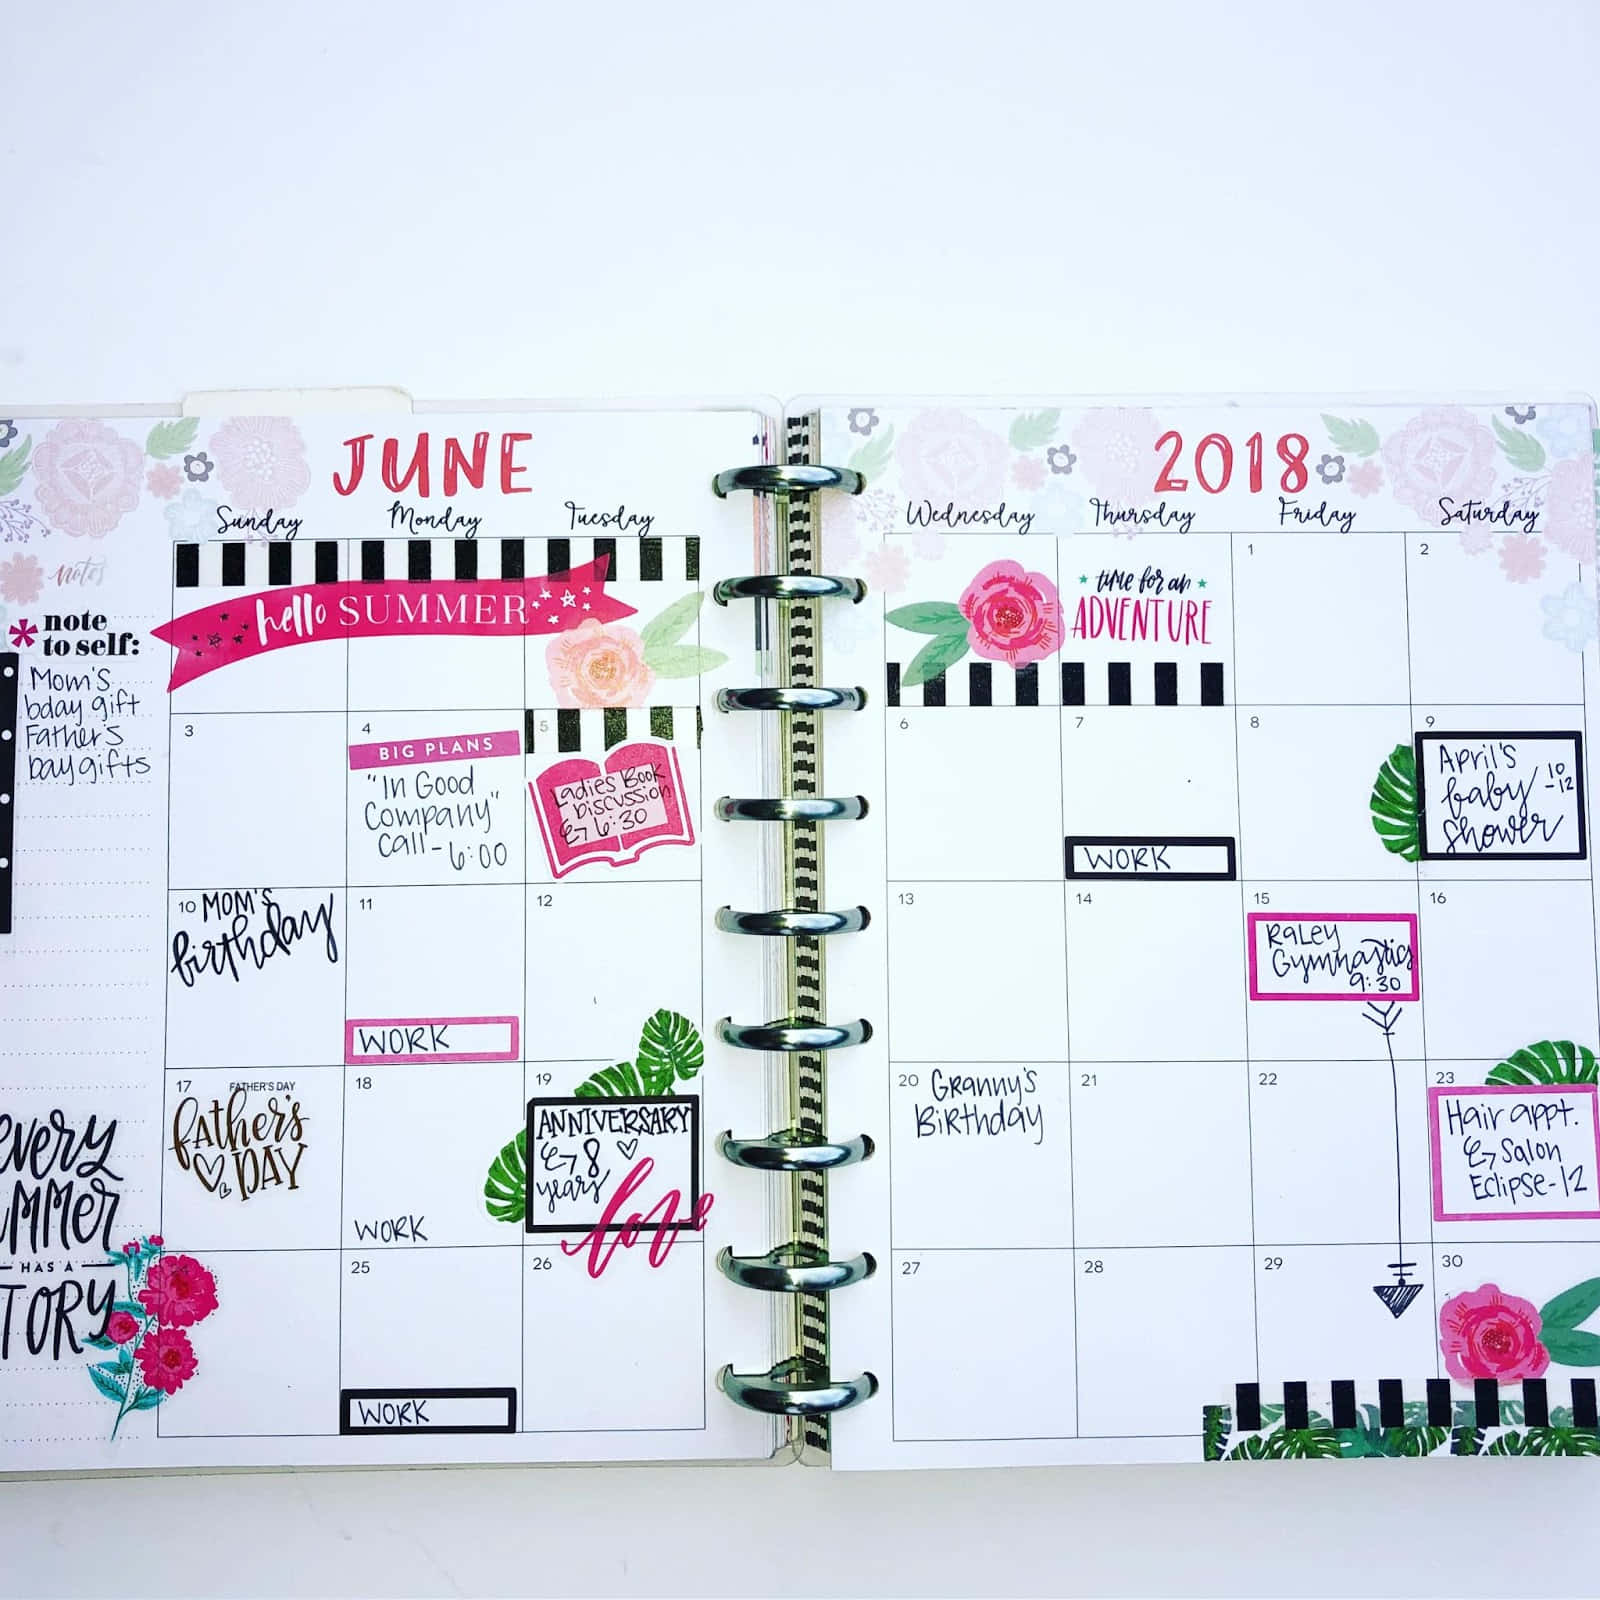 A Planner With A Floral Design And Stickers